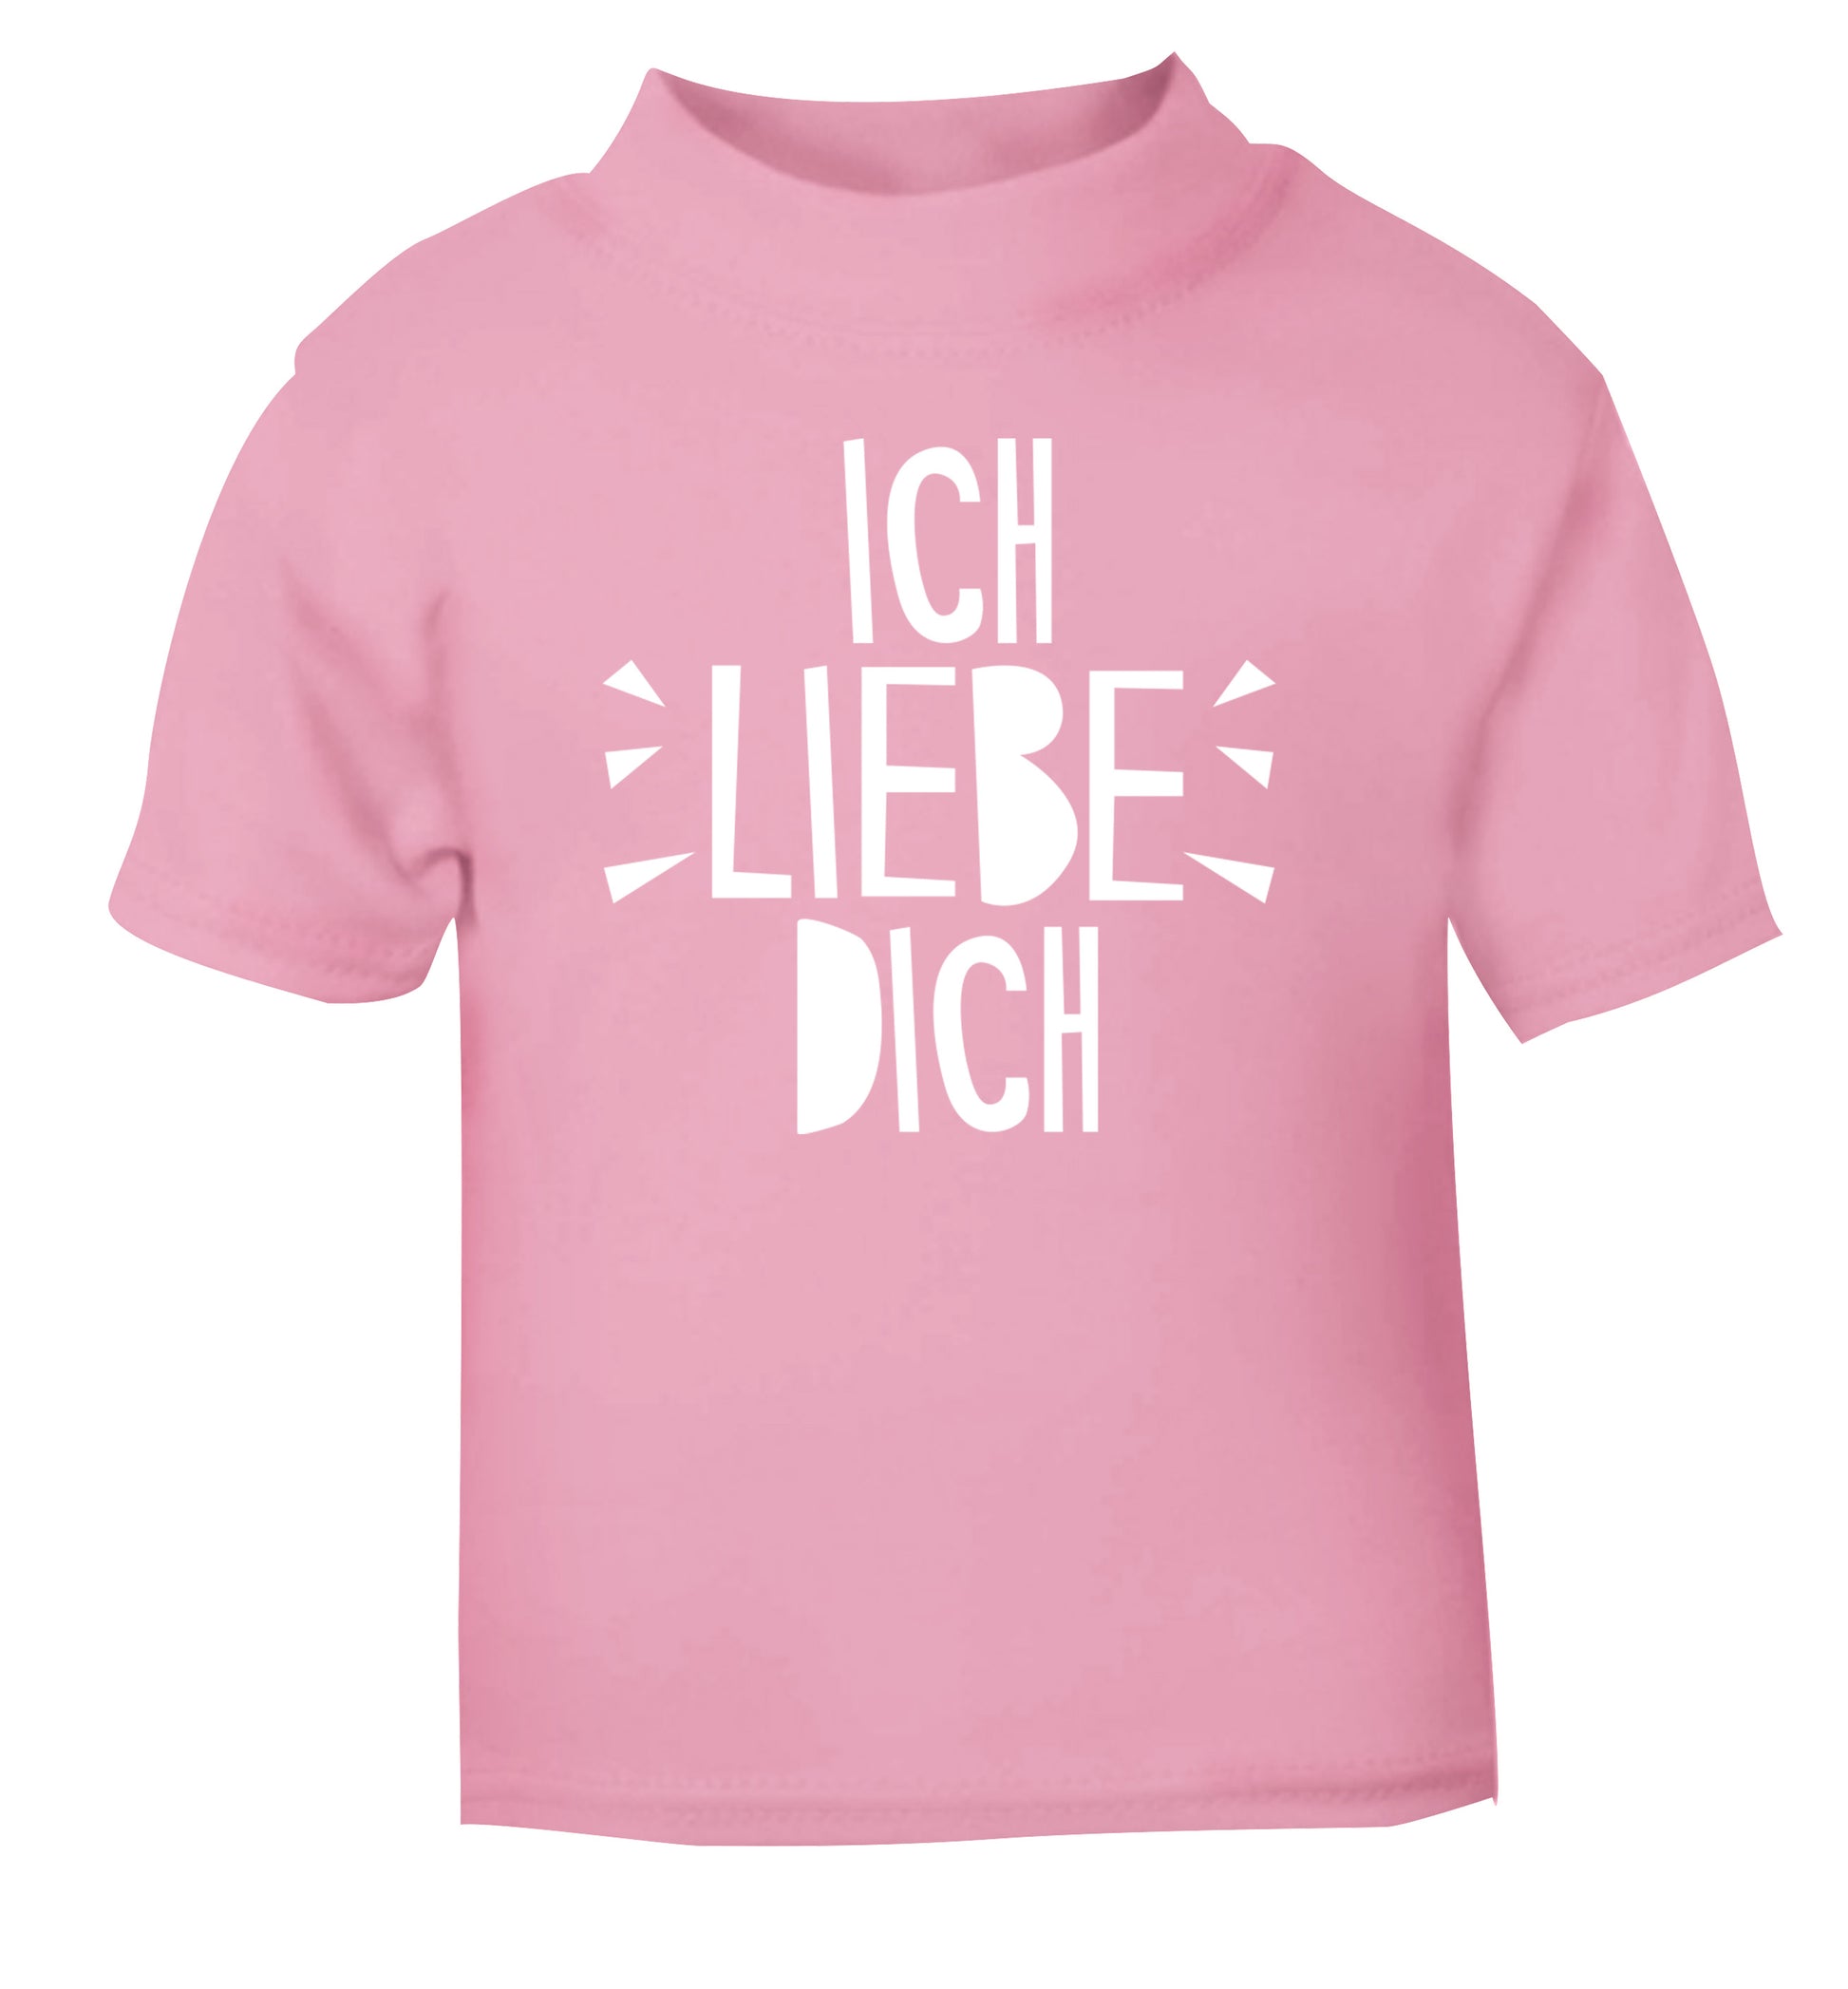 Ich liebe dich - I love you light pink Baby Toddler Tshirt 2 Years